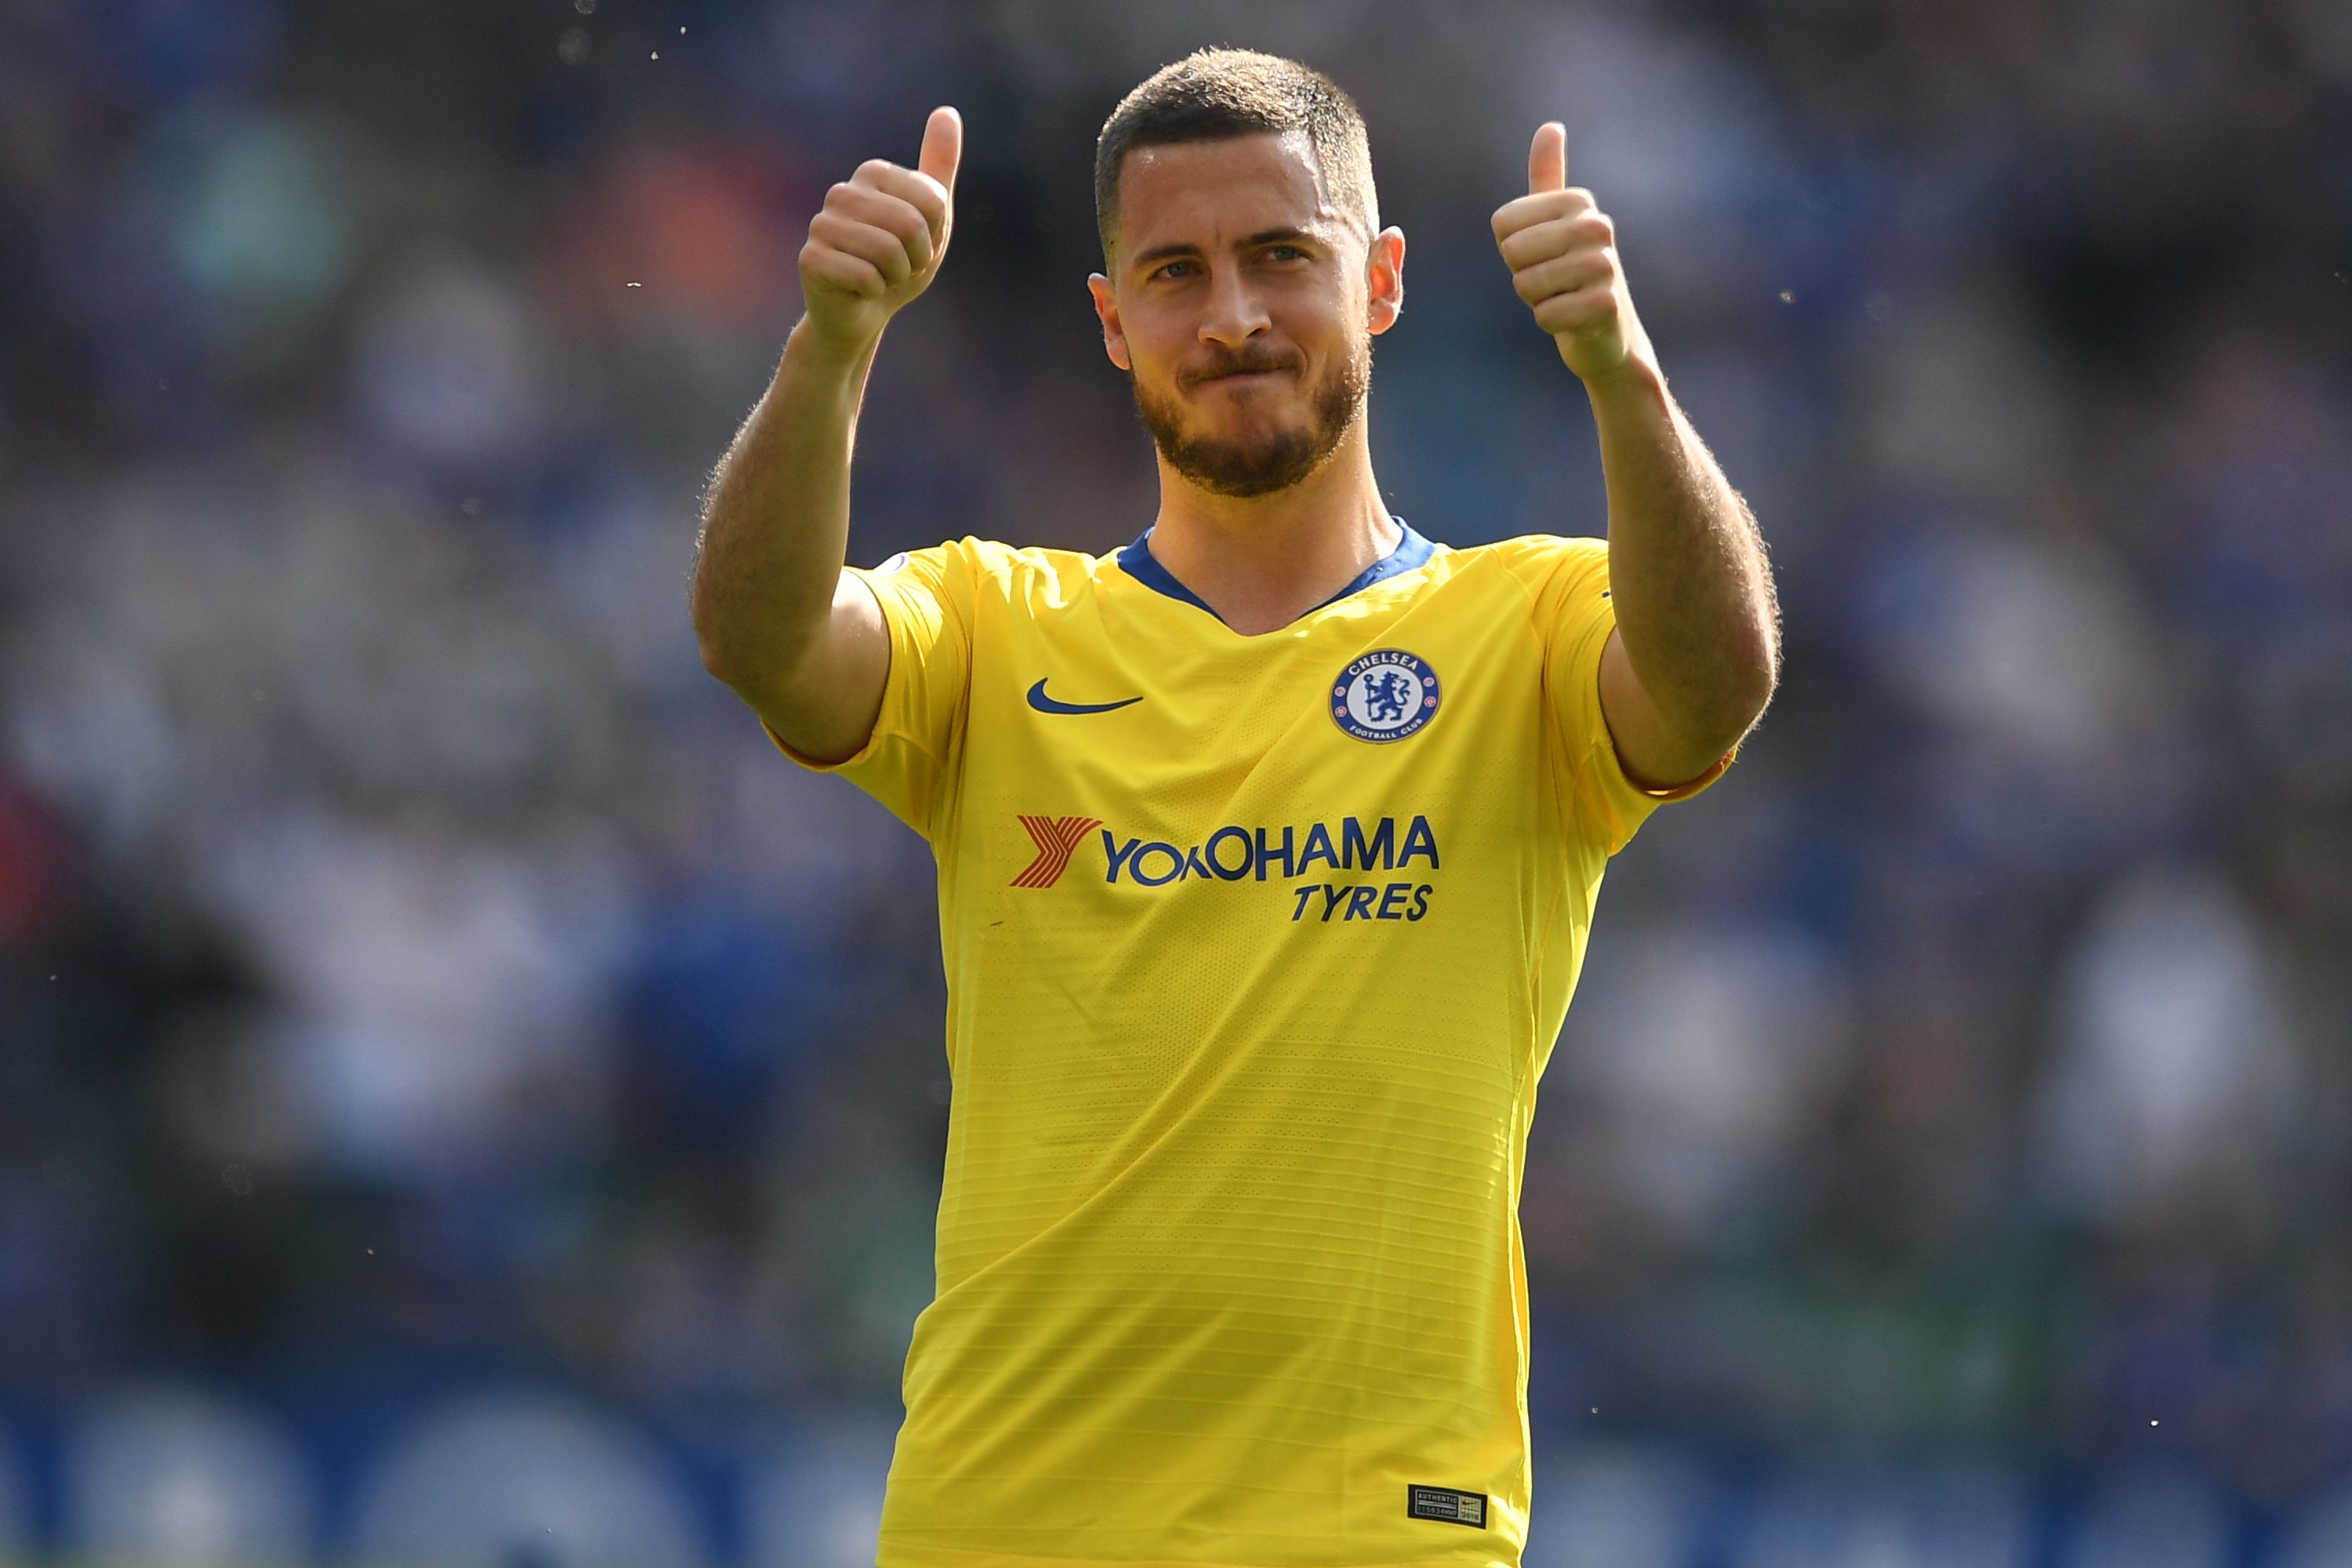 Chelsea's Belgian midfielder Eden Hazard gestures to supporters on the pitch after the English Premier League football match between Leicester City and Chelsea at King Power Stadium in Leicester, central England on May 12, 2019. - The game finished 0-0. (Photo by Daniel LEAL-OLIVAS / AFP) / RESTRICTED TO EDITORIAL USE. No use with unauthorized audio, video, data, fixture lists, club/league logos or 'live' services. Online in-match use limited to 120 images. An additional 40 images may be used in extra time. No video emulation. Social media in-match use limited to 120 images. An additional 40 images may be used in extra time. No use in betting publications, games or single club/league/player publications. /         (Photo credit should read DANIEL LEAL-OLIVAS/AFP/Getty Images)